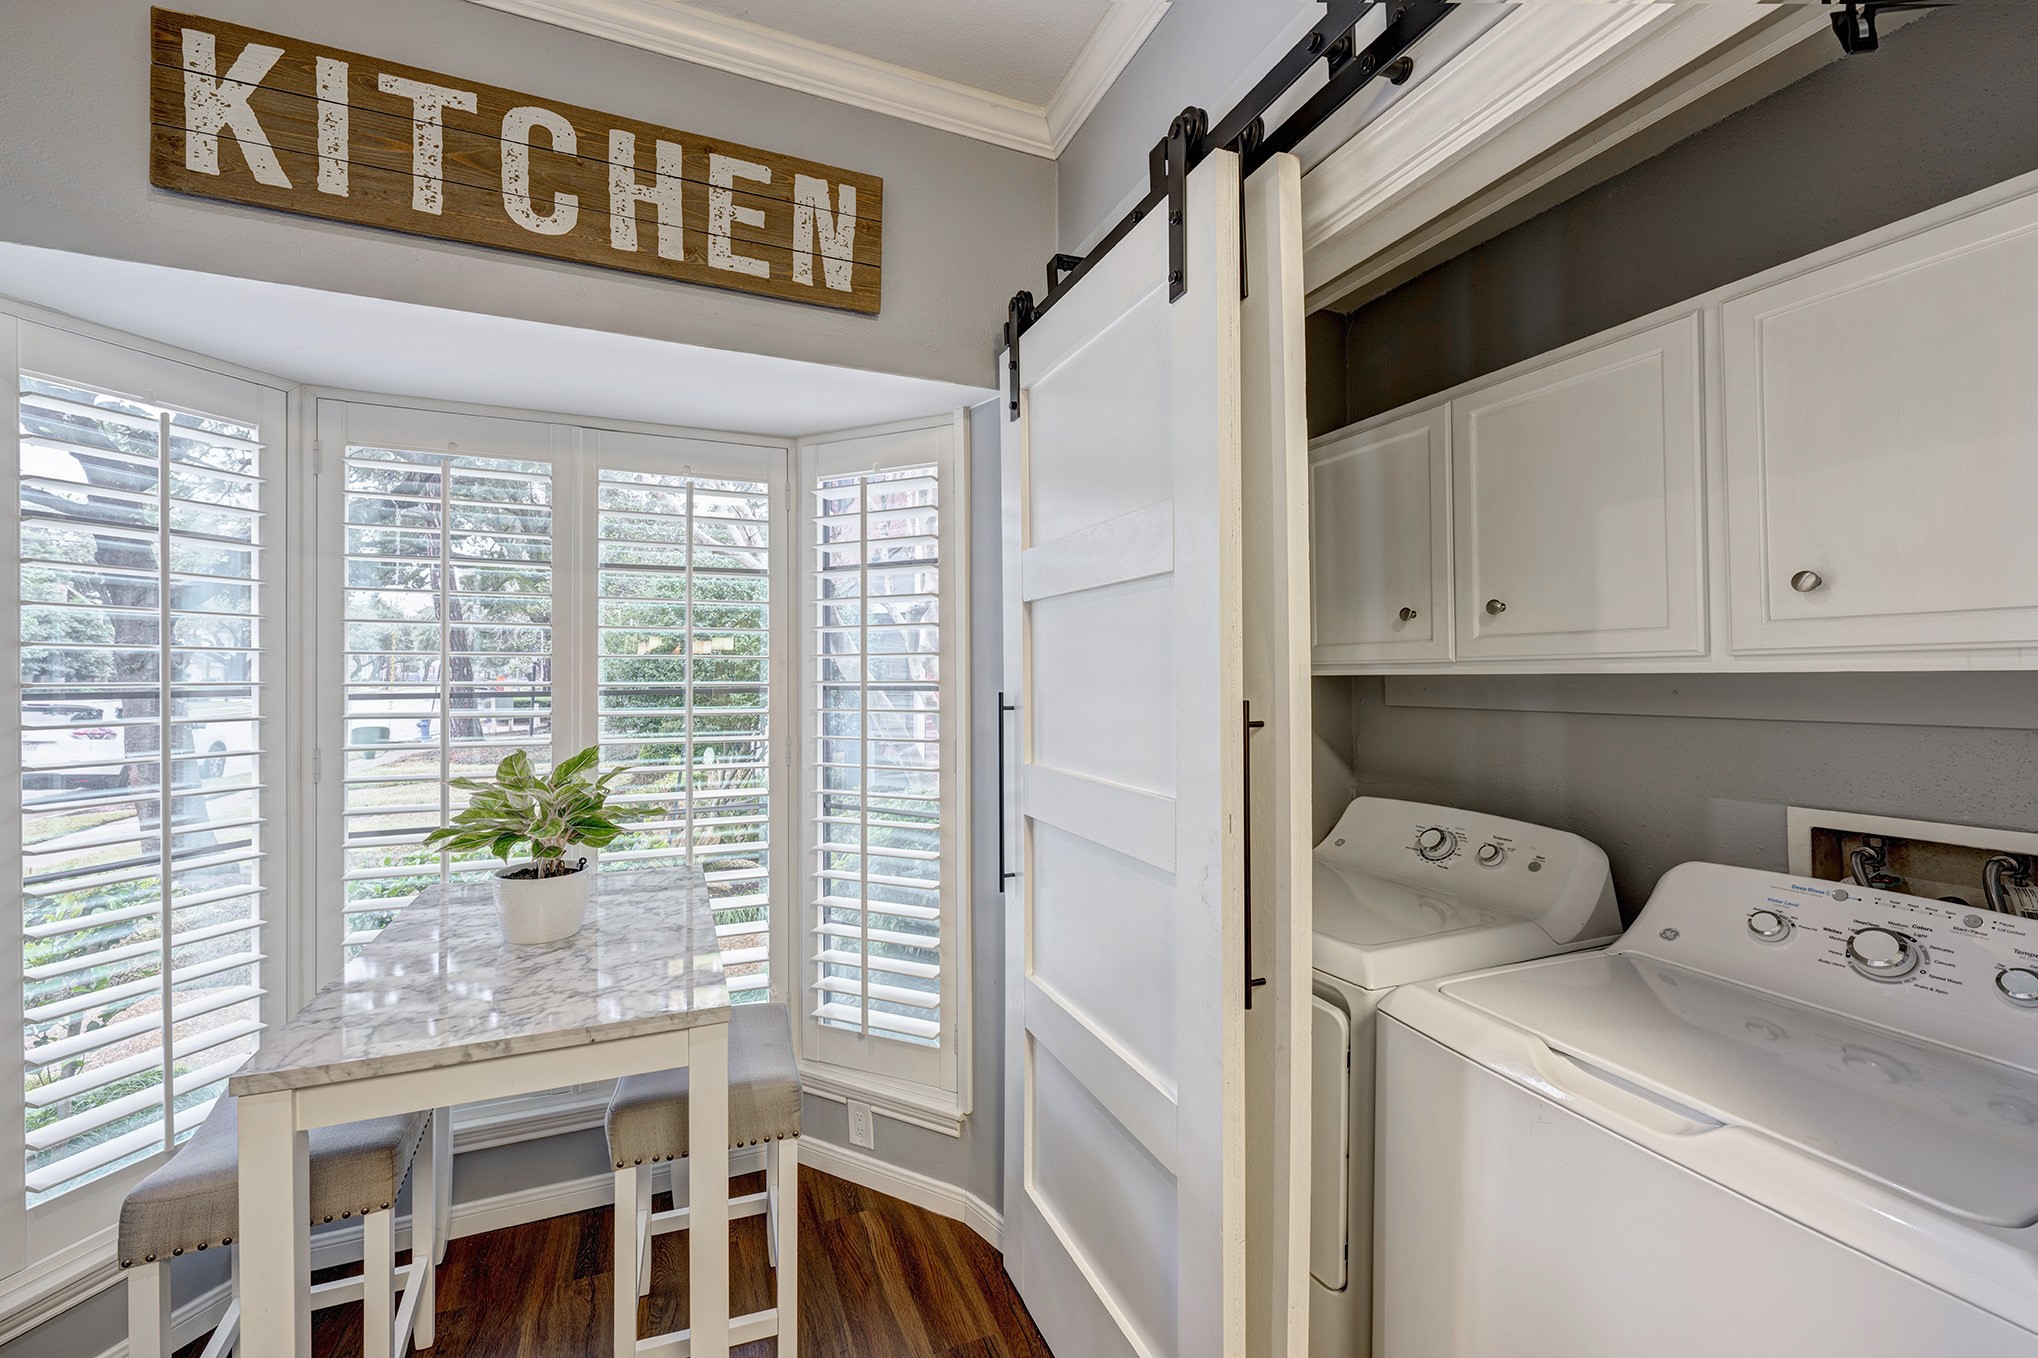 With tasteful plantation shutters and a warm ambience, the breakfast room in the kitchen offers a cozy atmosphere. Meanwhile, the laundry closet/room can be found behind the double doors to the right.